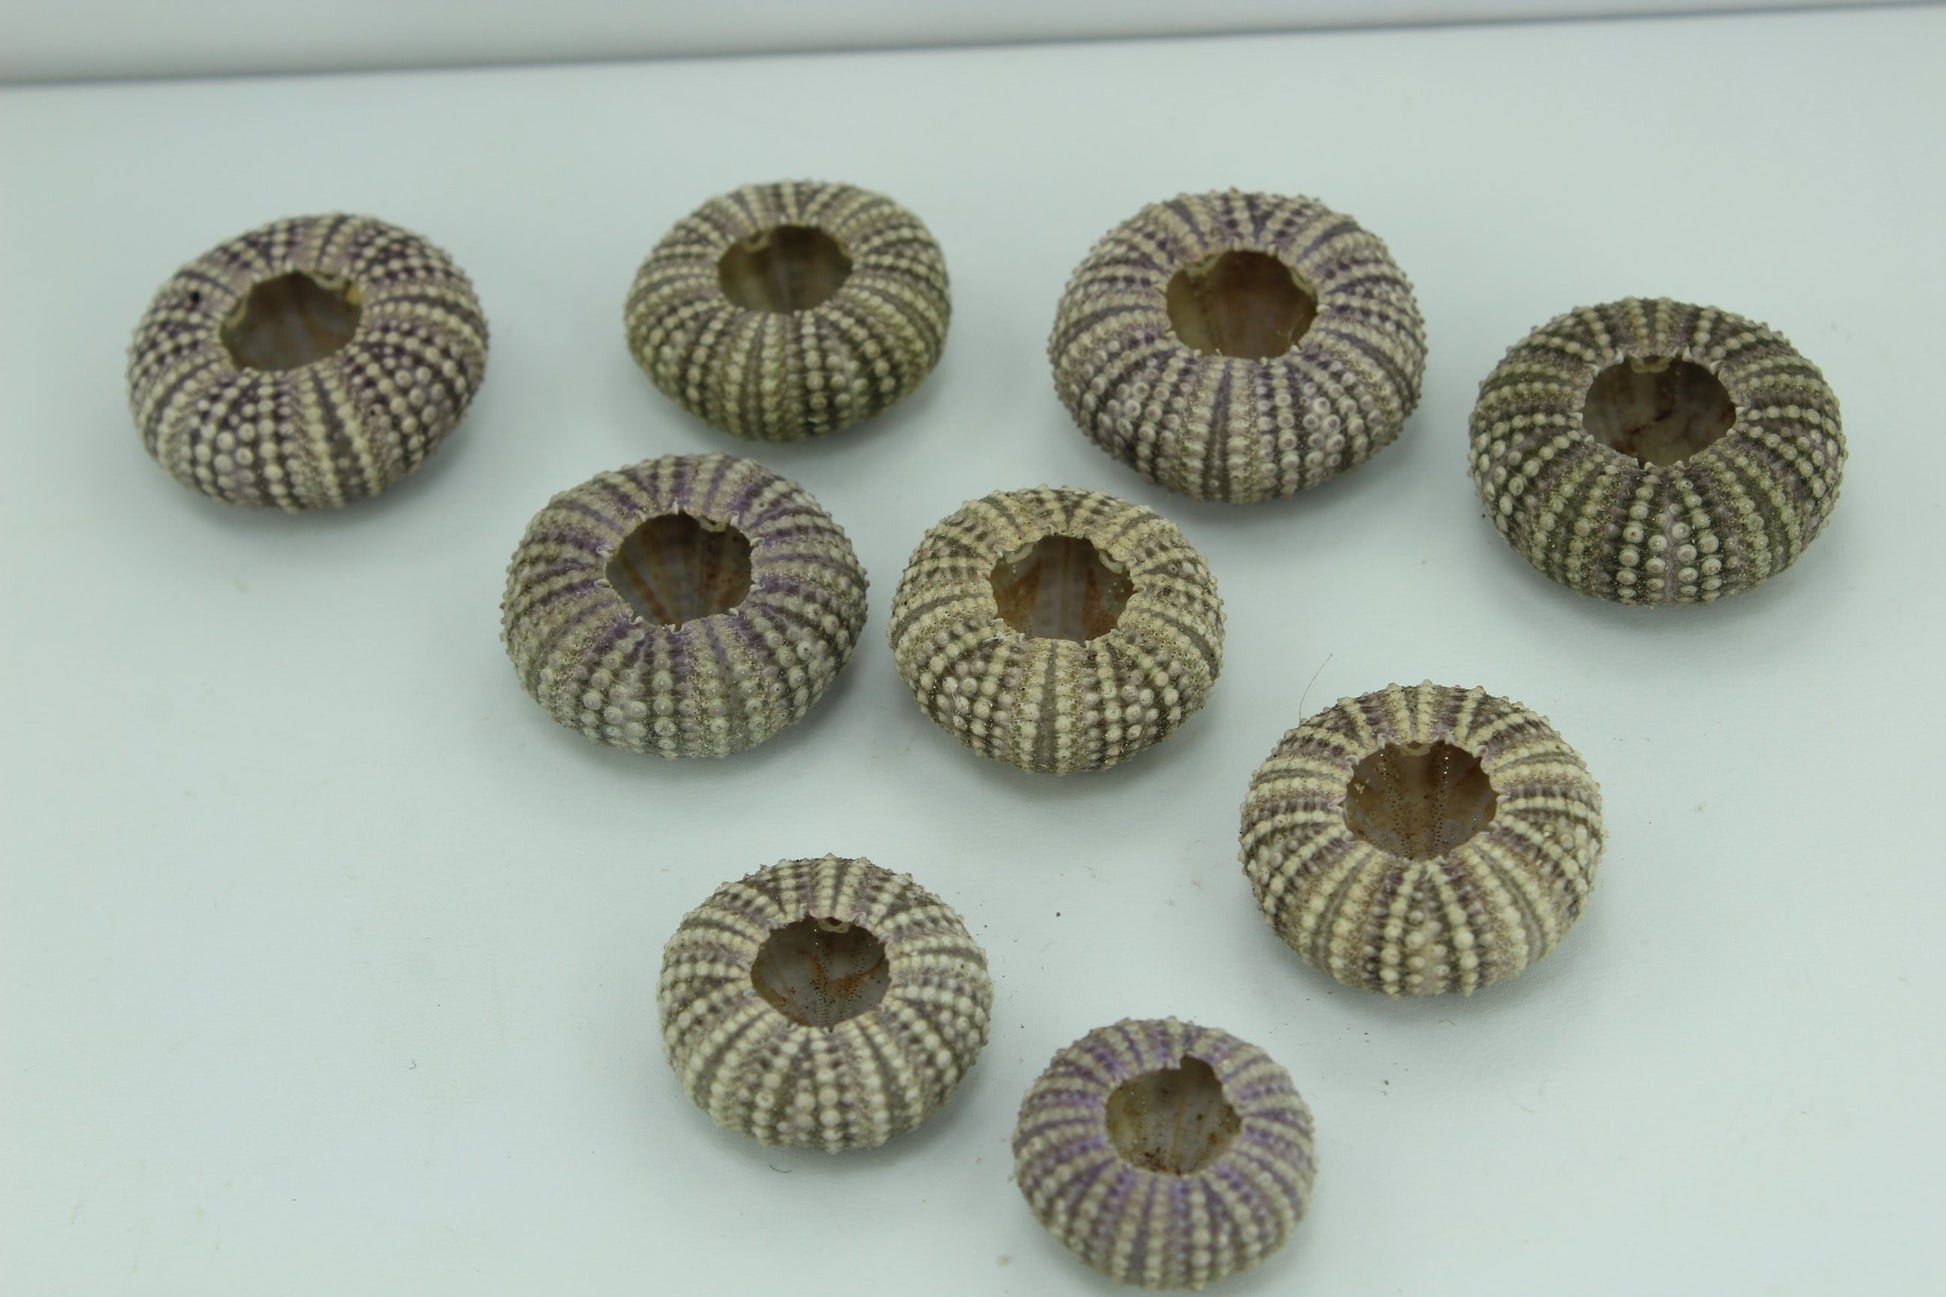 Florida Natural Baby Sea Urchins Estate Collection 1960s 70s Jewelry Shell Art Collectibles tiny